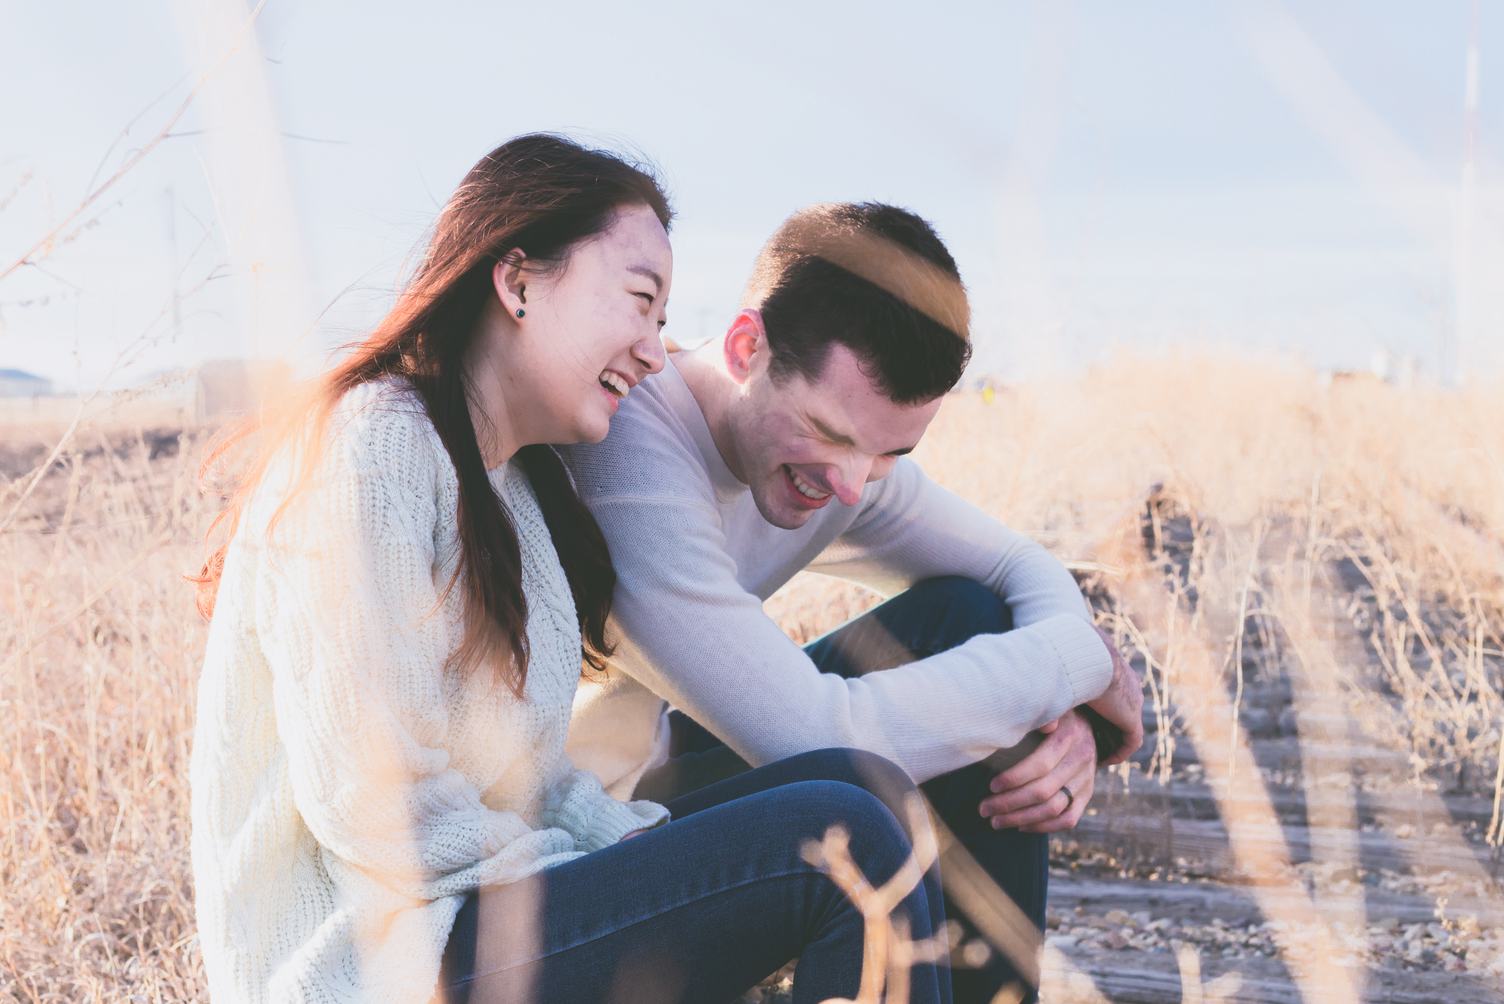 Couple Sitting and Laughing on a Railroad Tracks